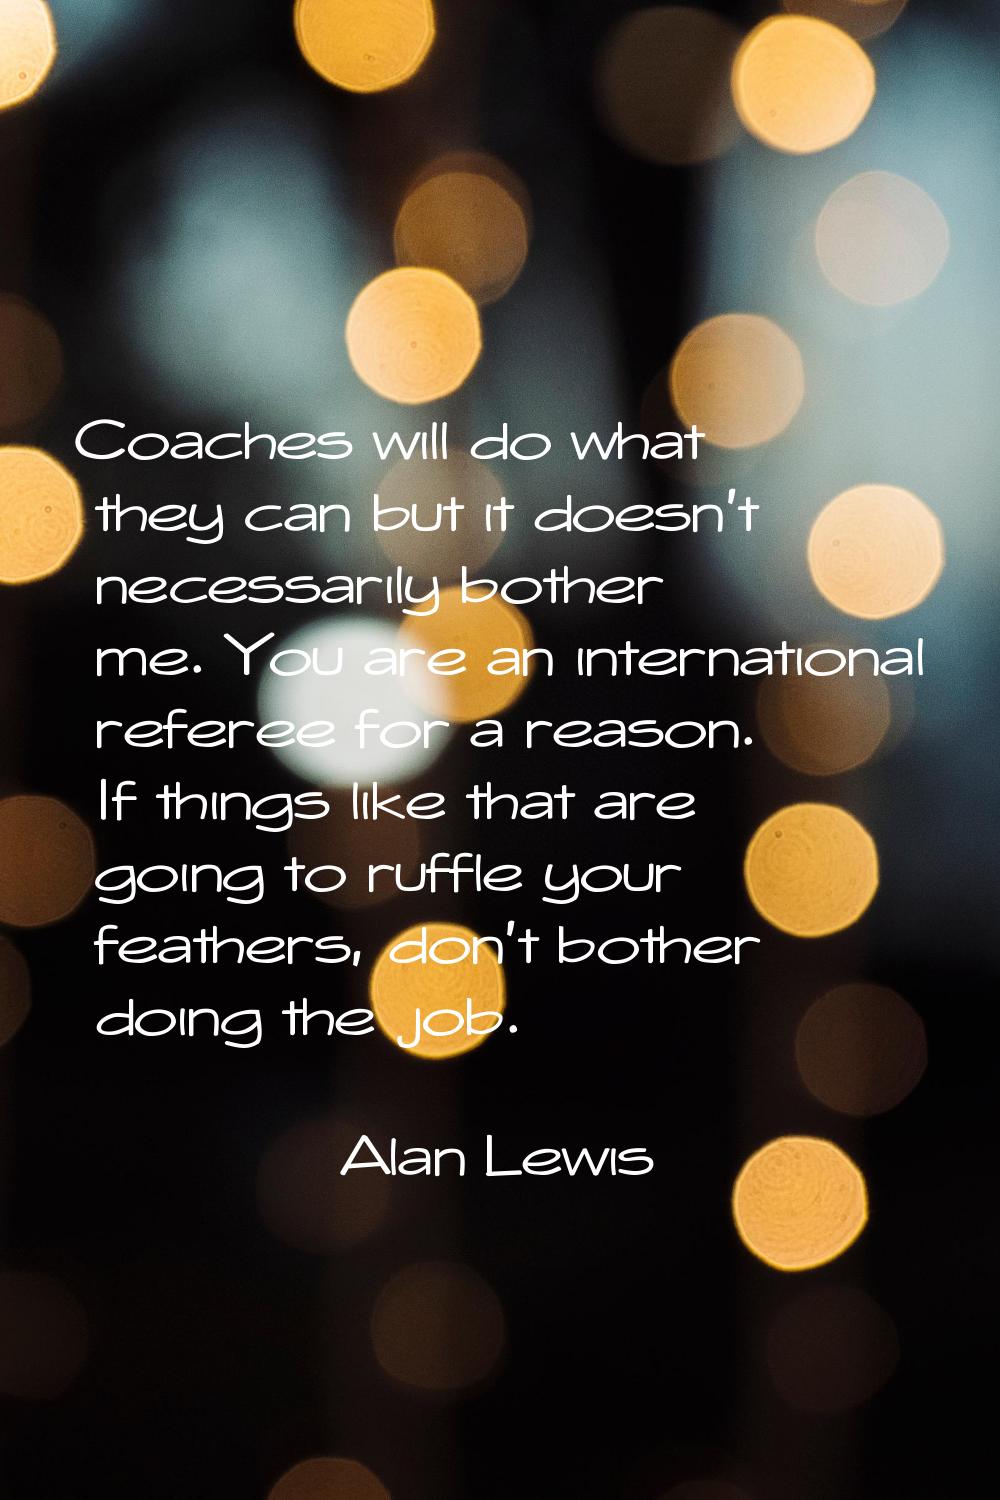 Coaches will do what they can but it doesn't necessarily bother me. You are an international refere